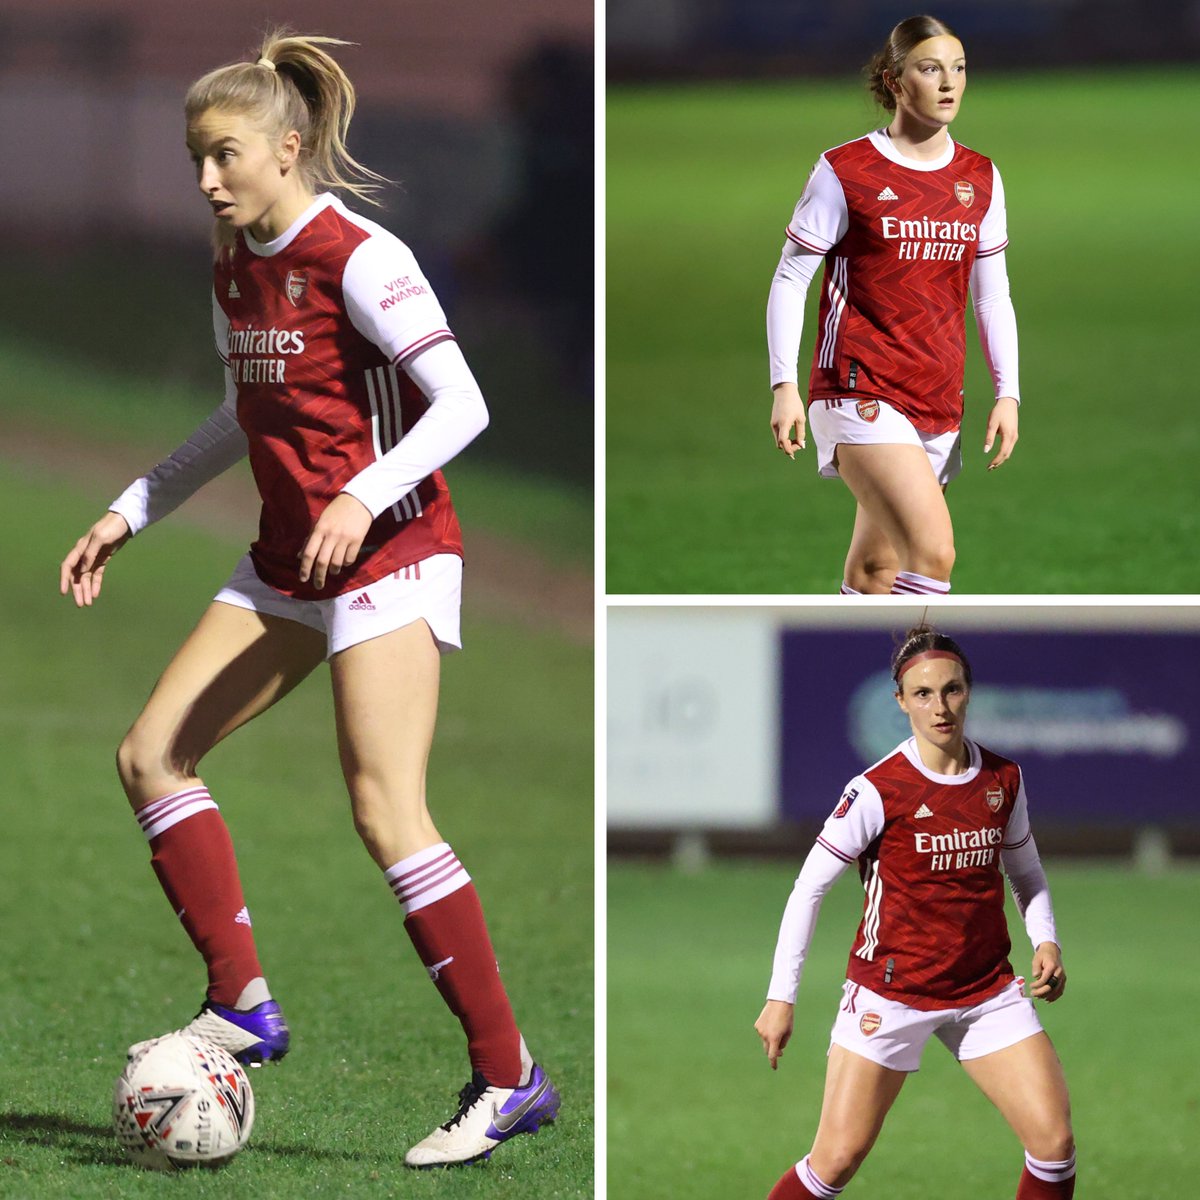 Arsenal Women On Twitter The Arsenal Way C Leah Williamson Ruby Mace Lotte Wubben Moy Promote From Within Build For The Future Https T Co Ilebqx3kd0